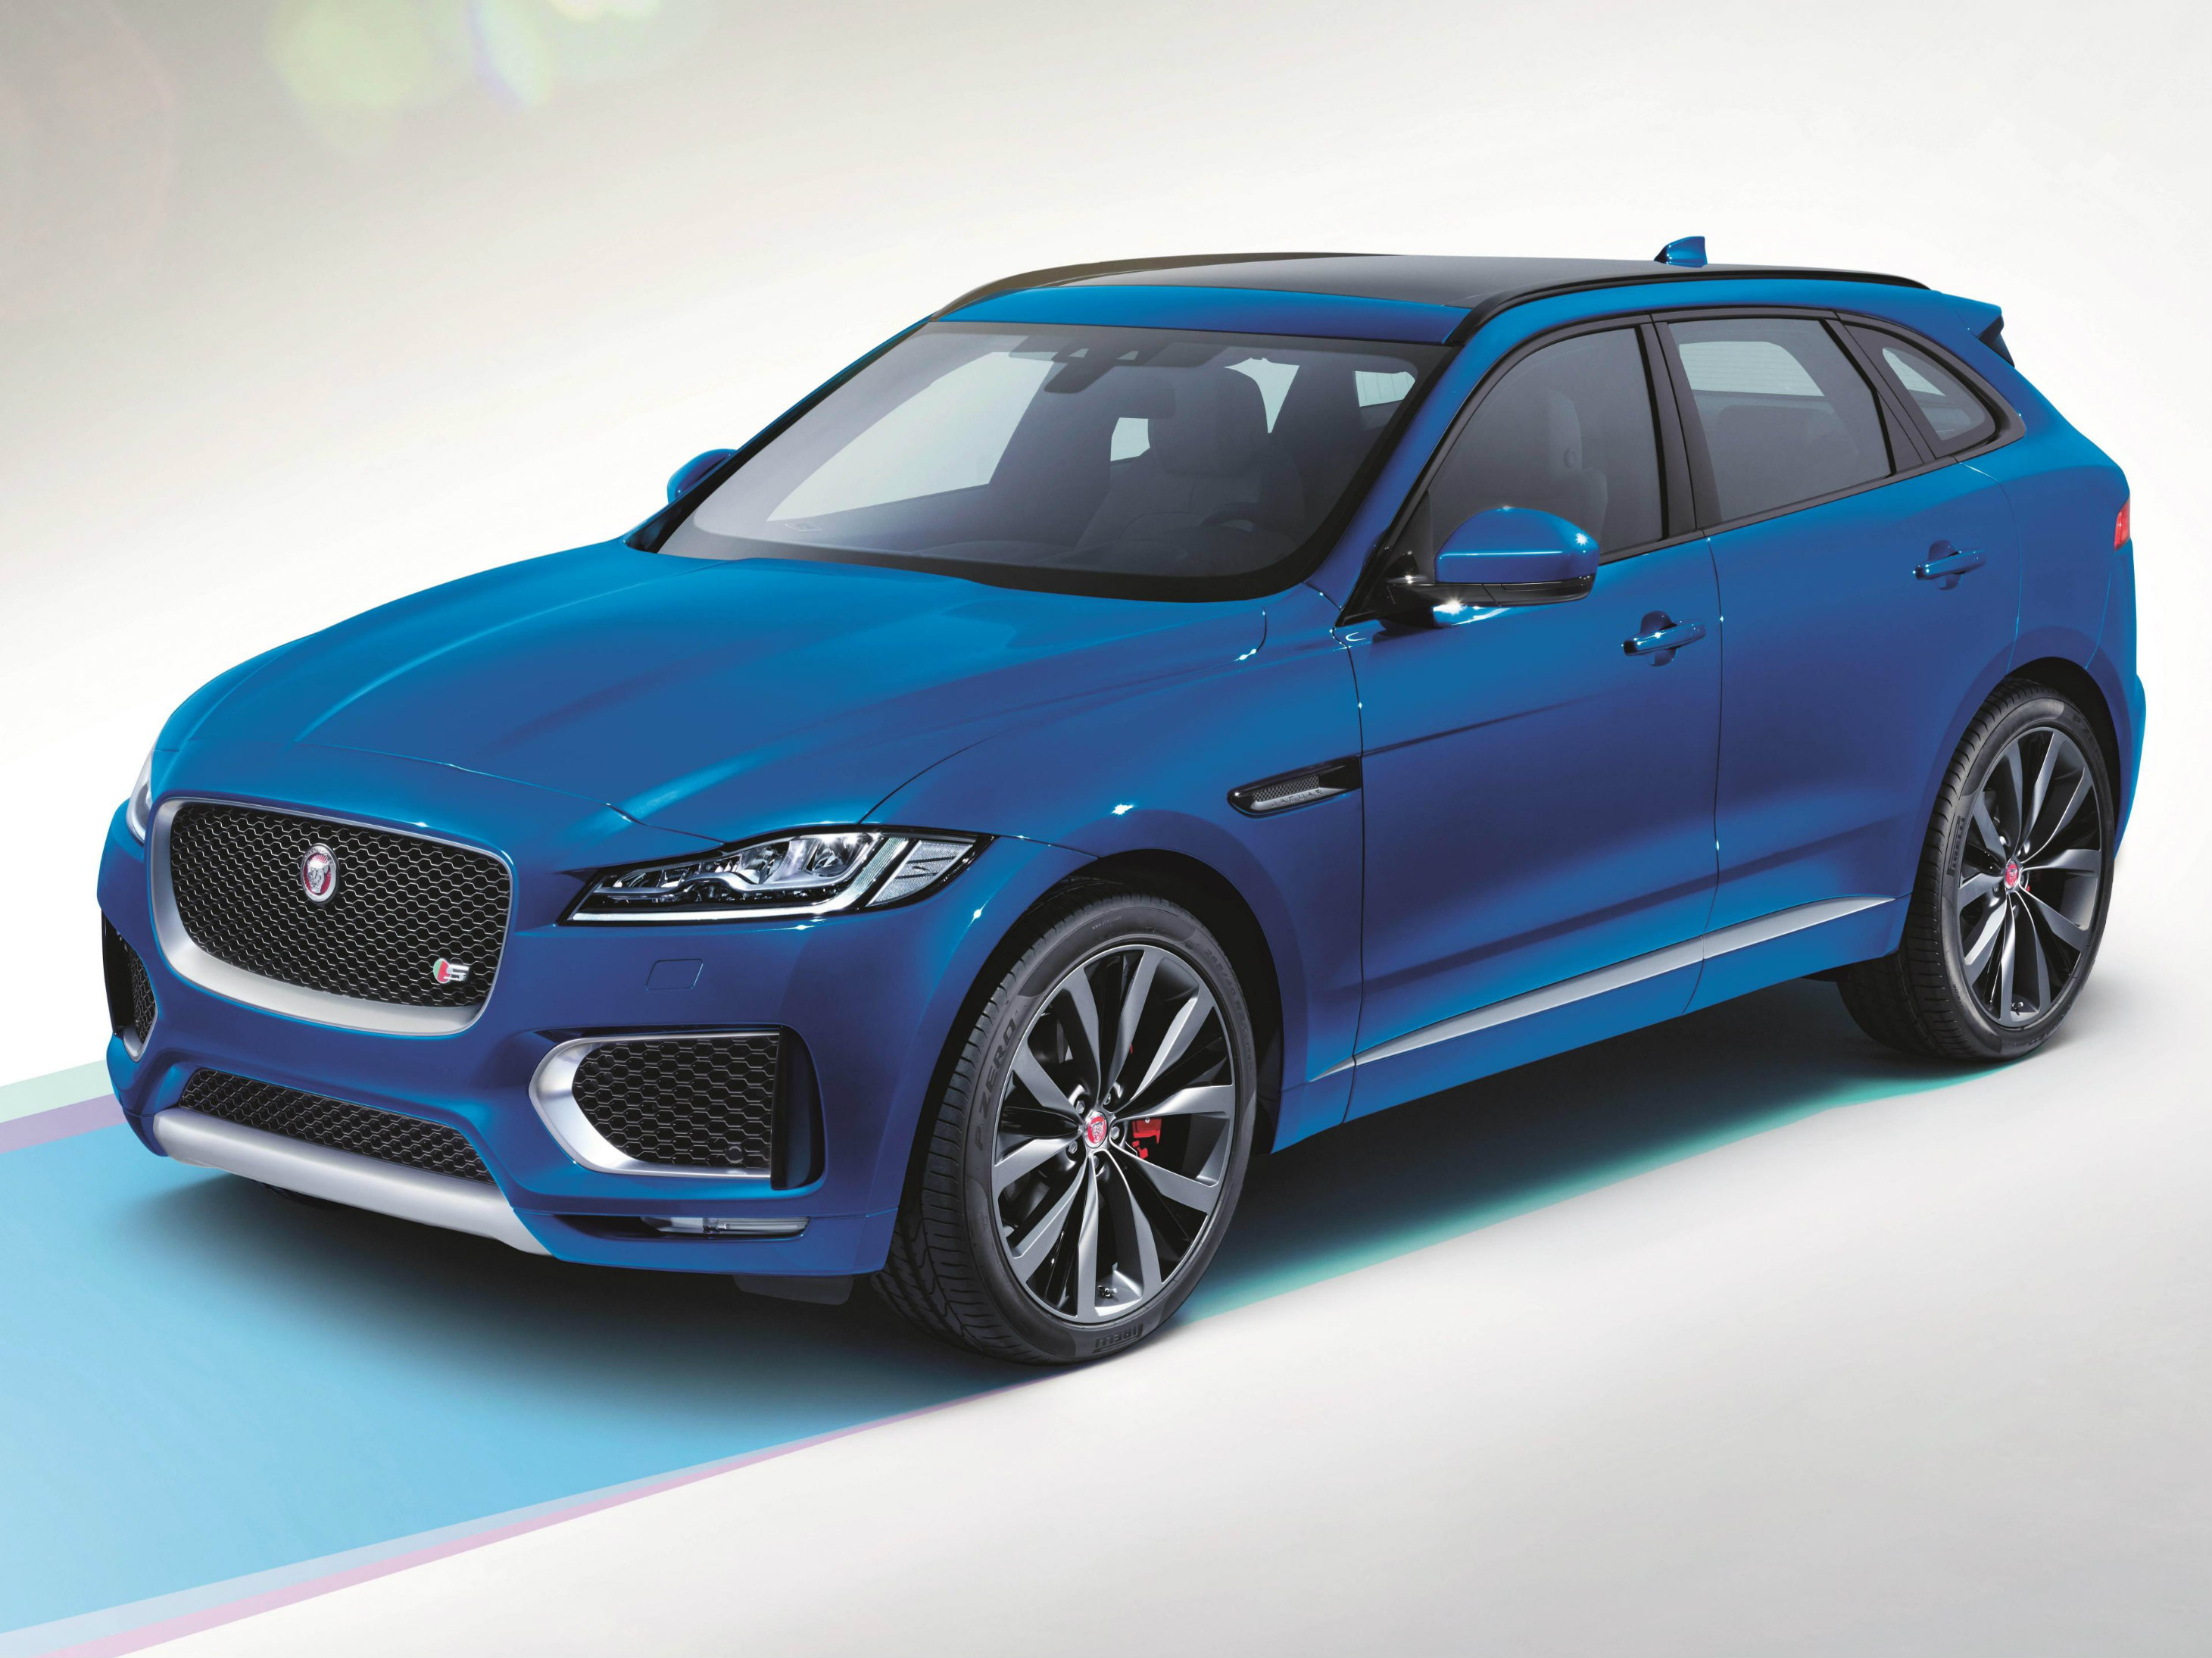 2016's hottest new cars including the Jaguar F-Pace